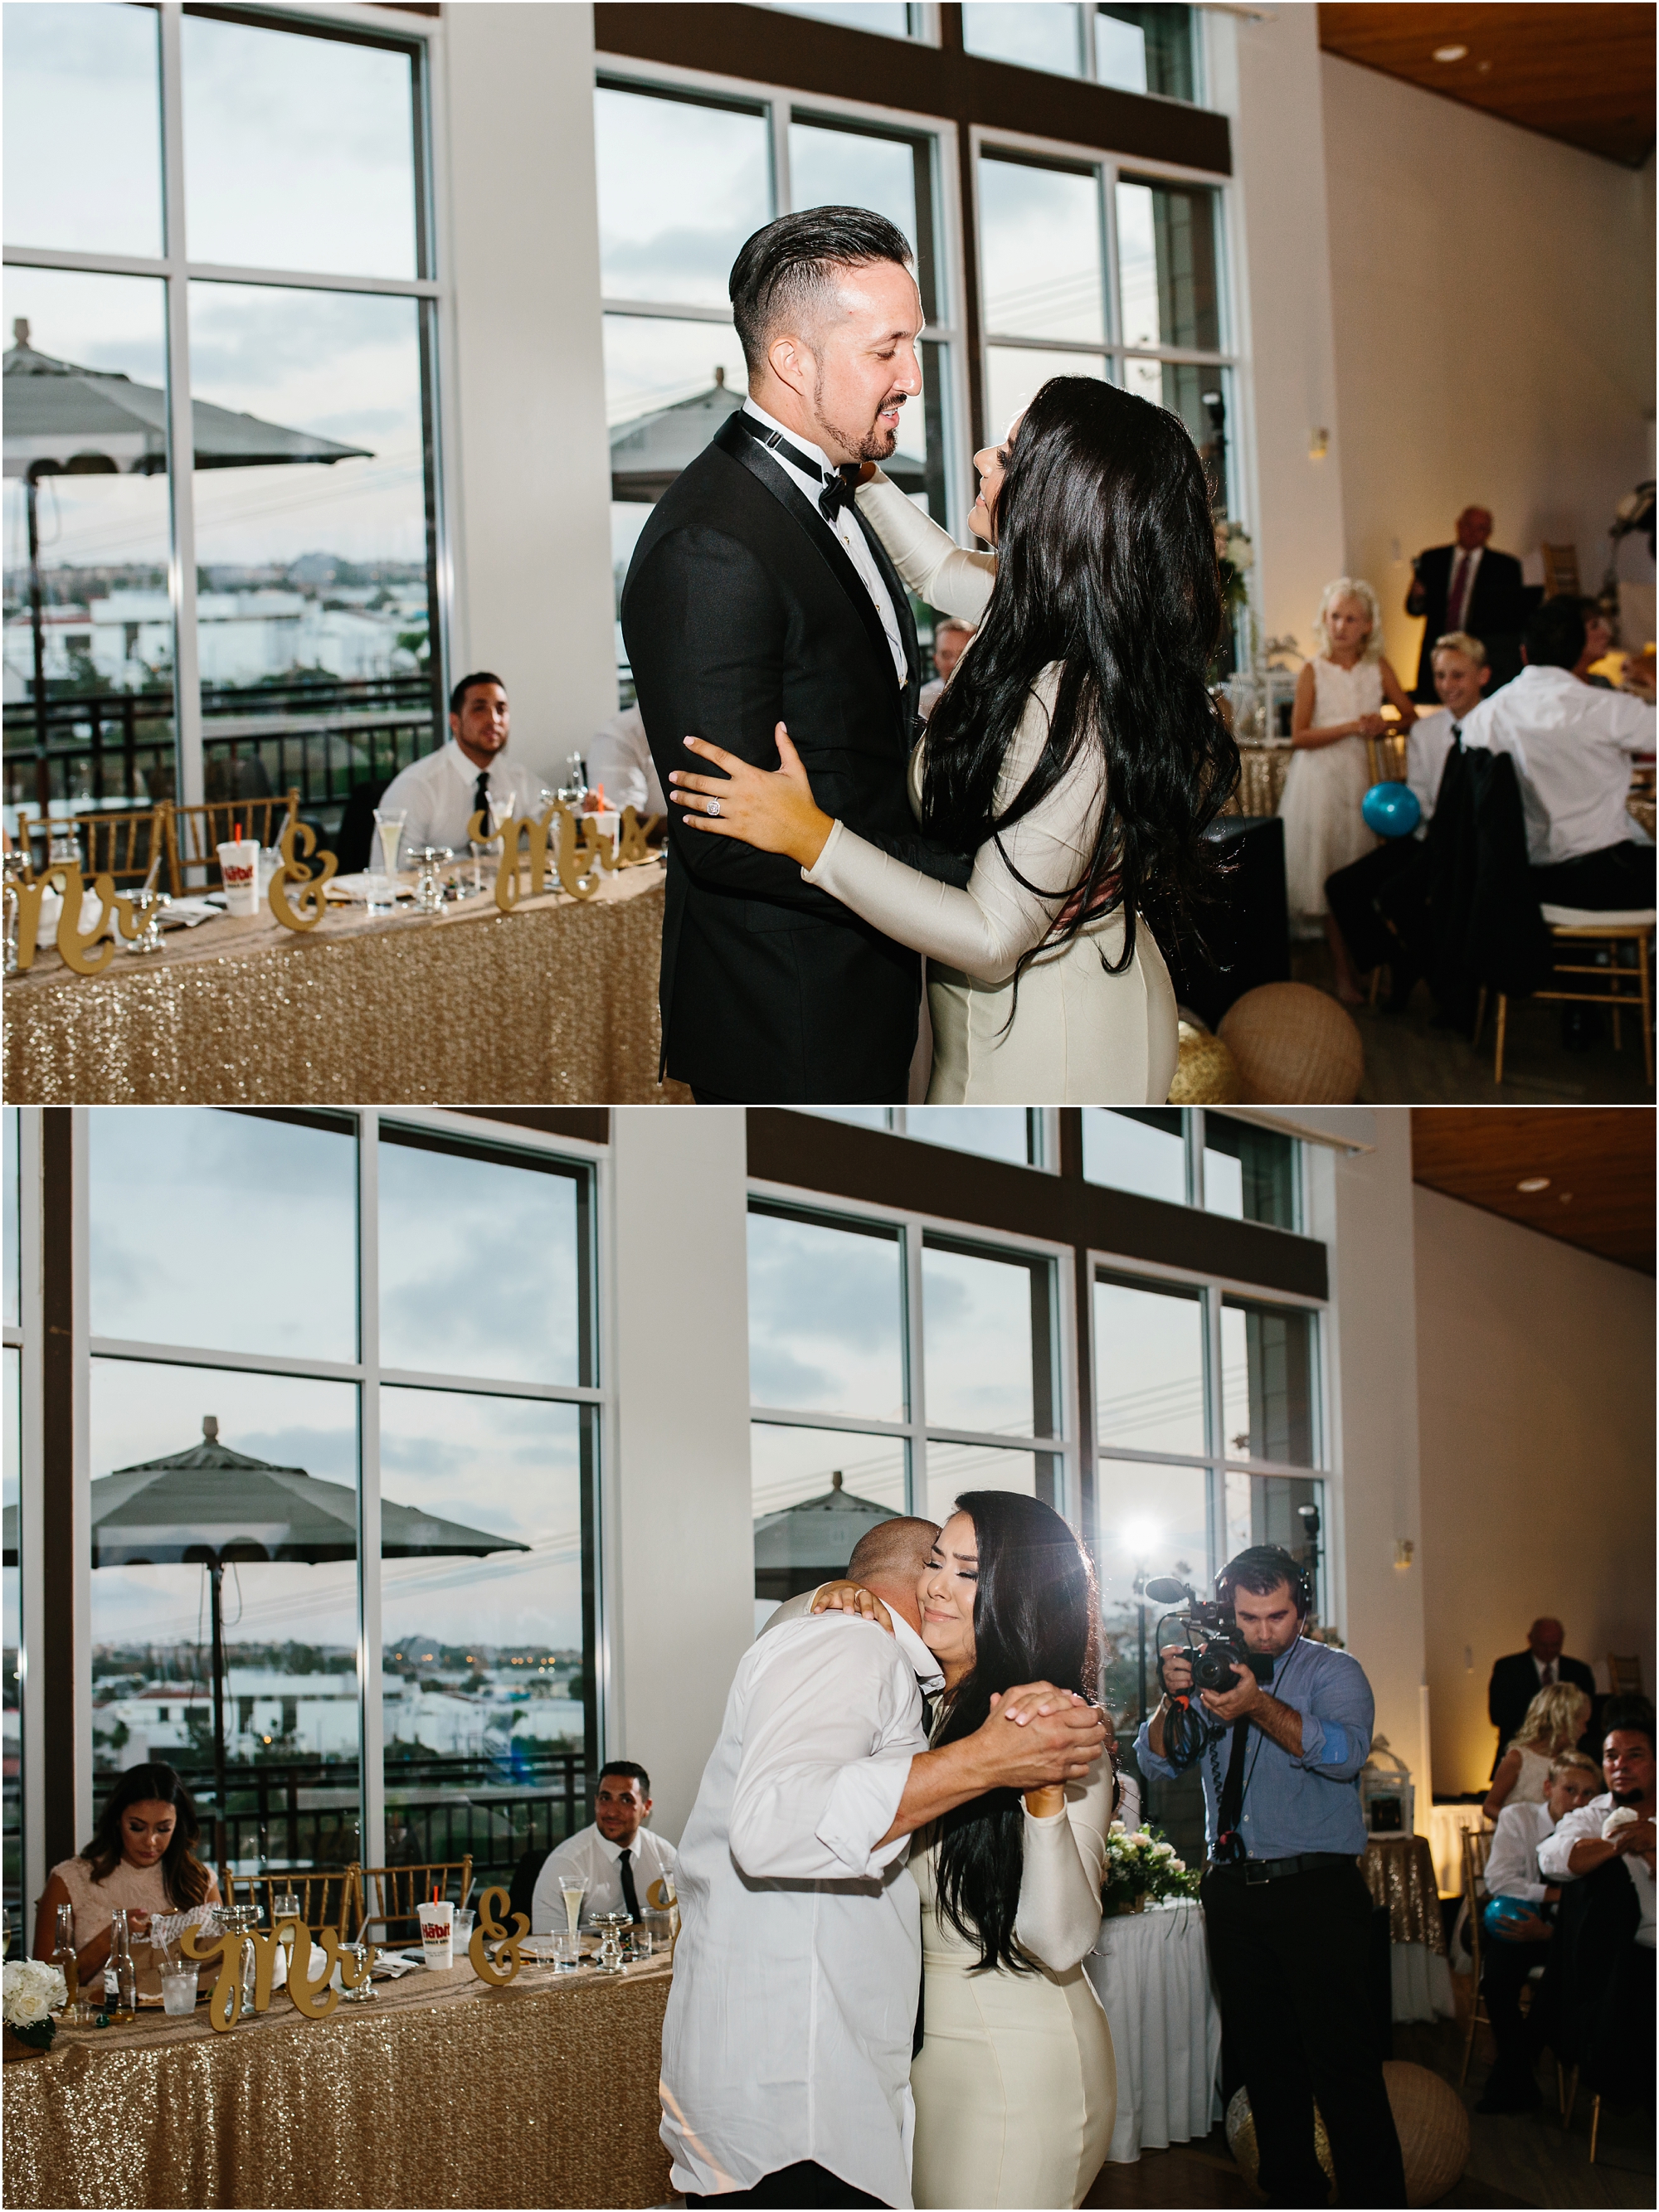 Reception in Carlsbad - https://brittneyhannonphotography.com